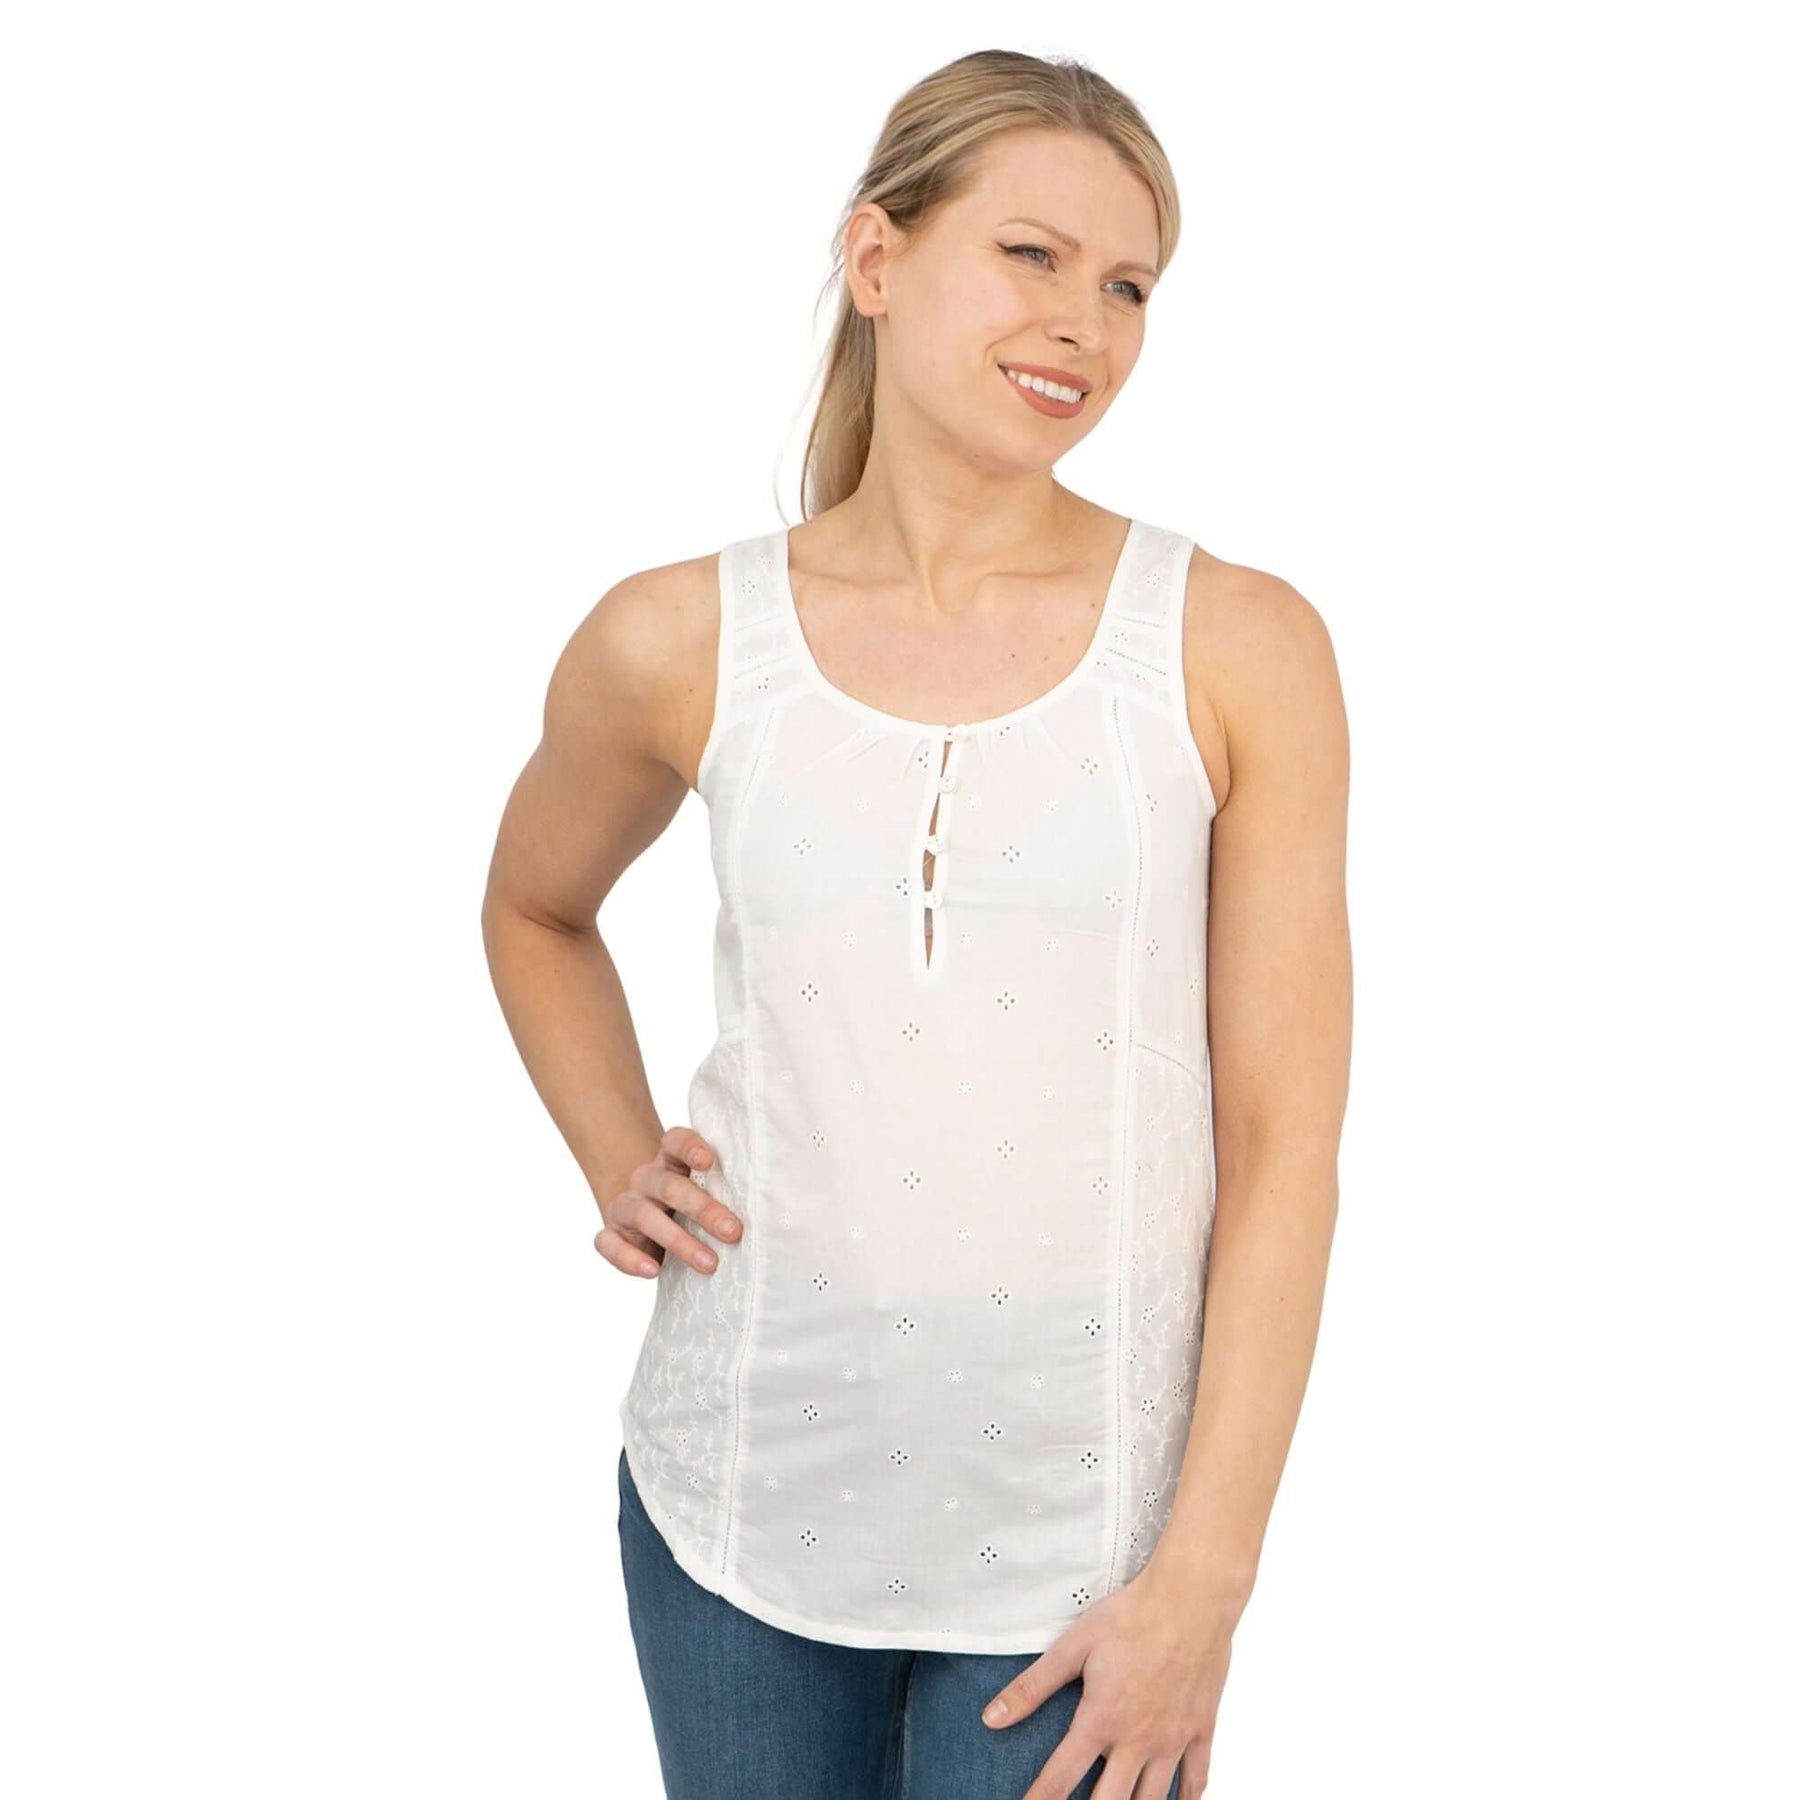 Women's Vests, Camis and Sleeveless Tops